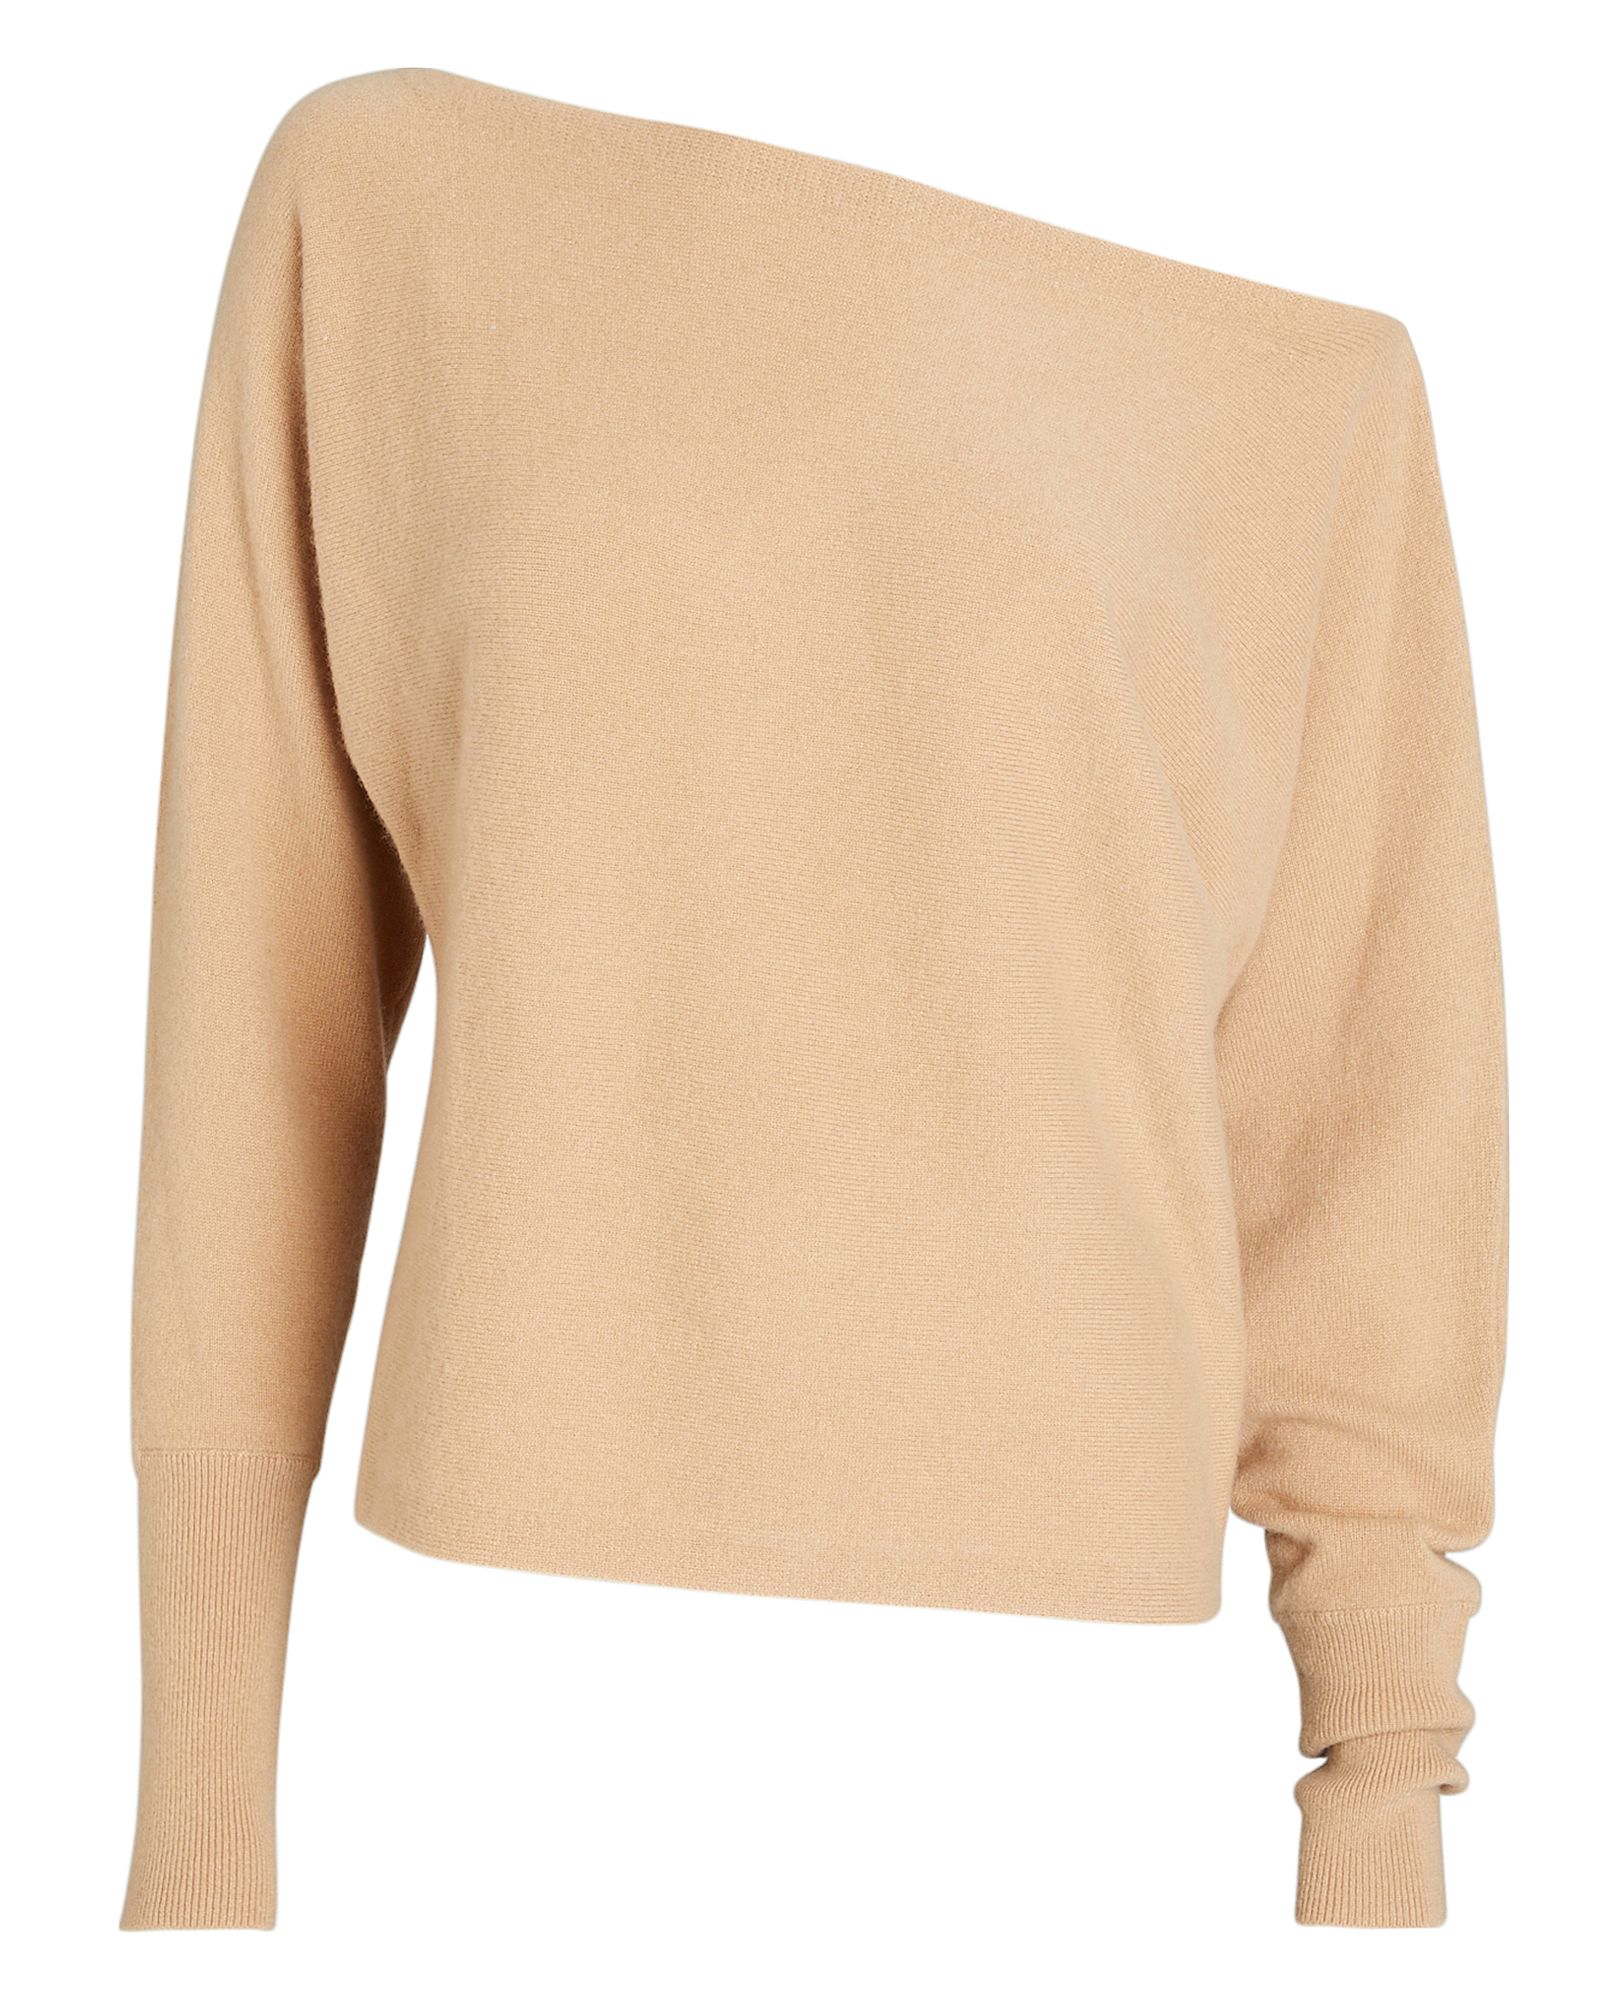 INTERMIX Reese Off-the-Shoulder Sweater, Brown L | INTERMIX